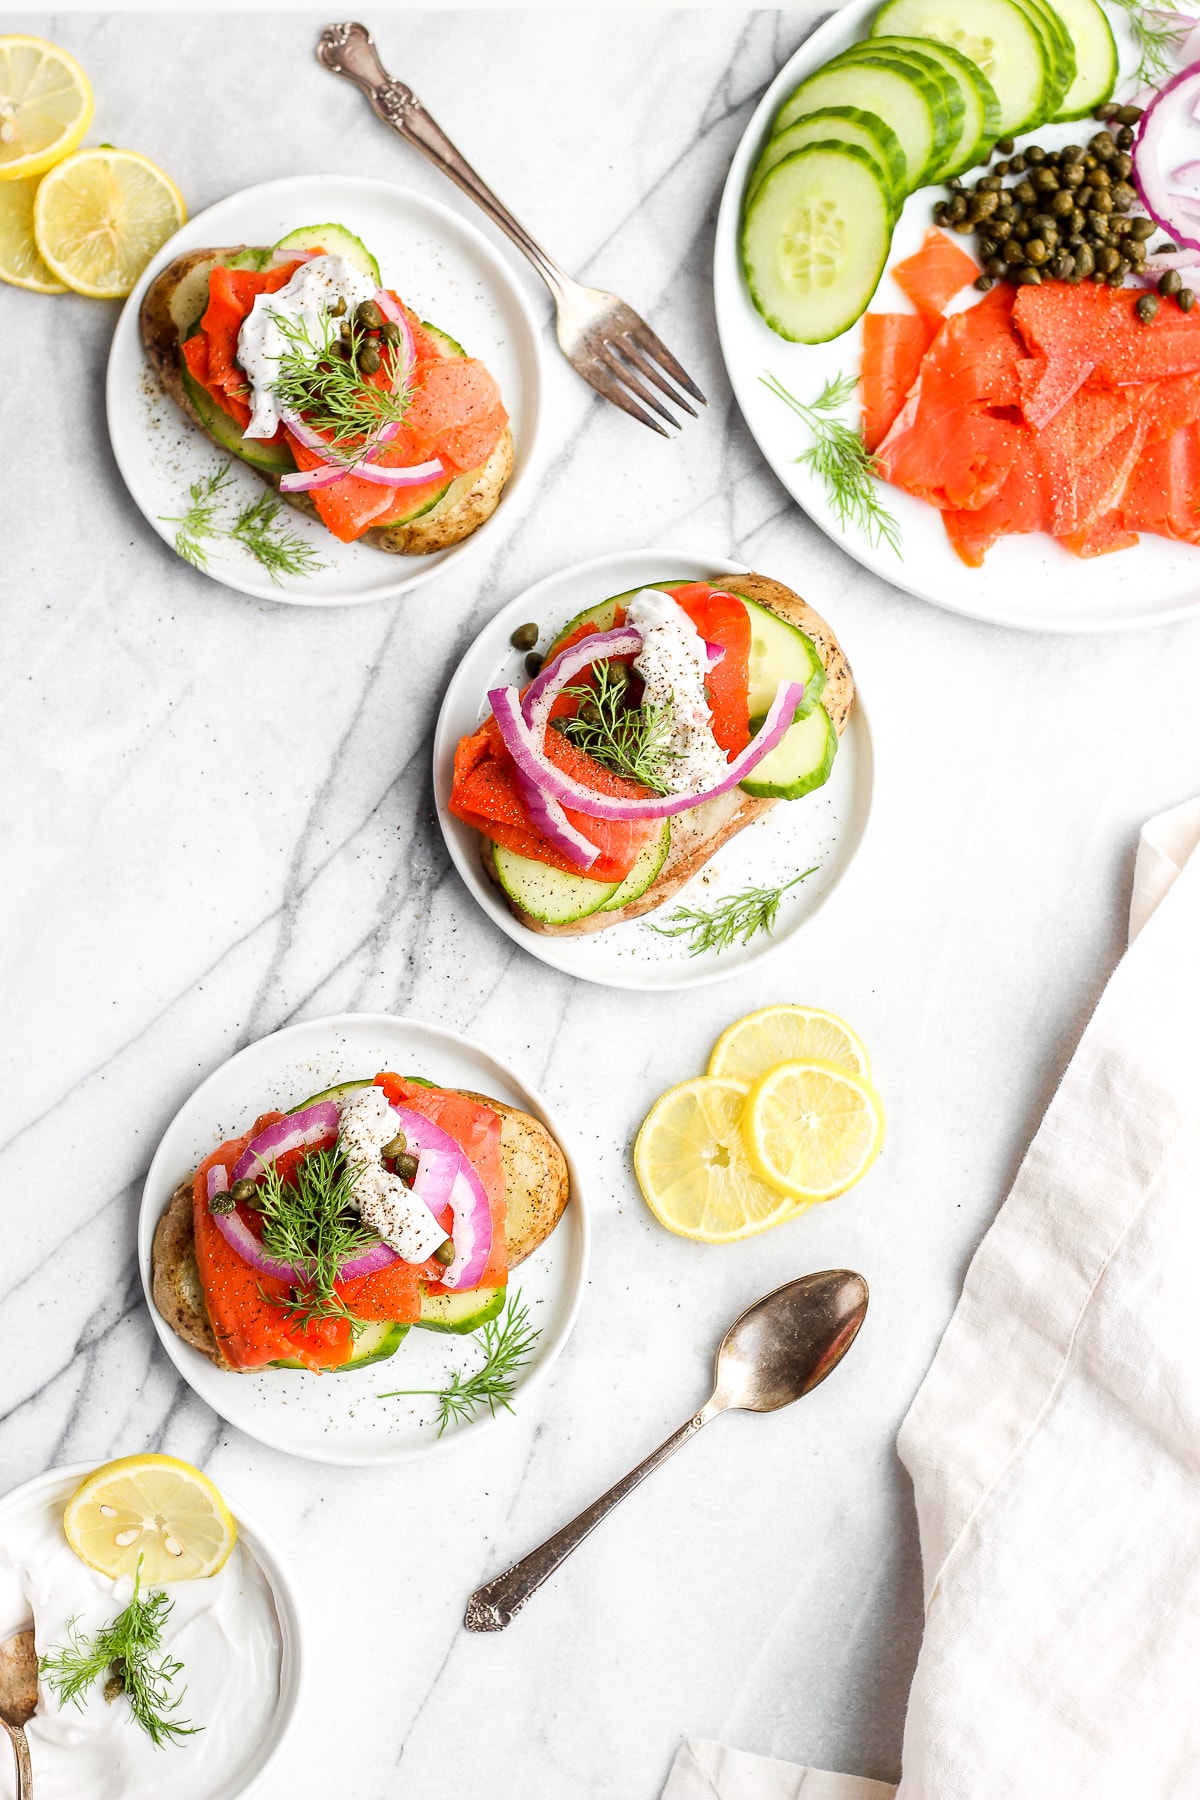 A few slices of smoked salmon toast on a plates.